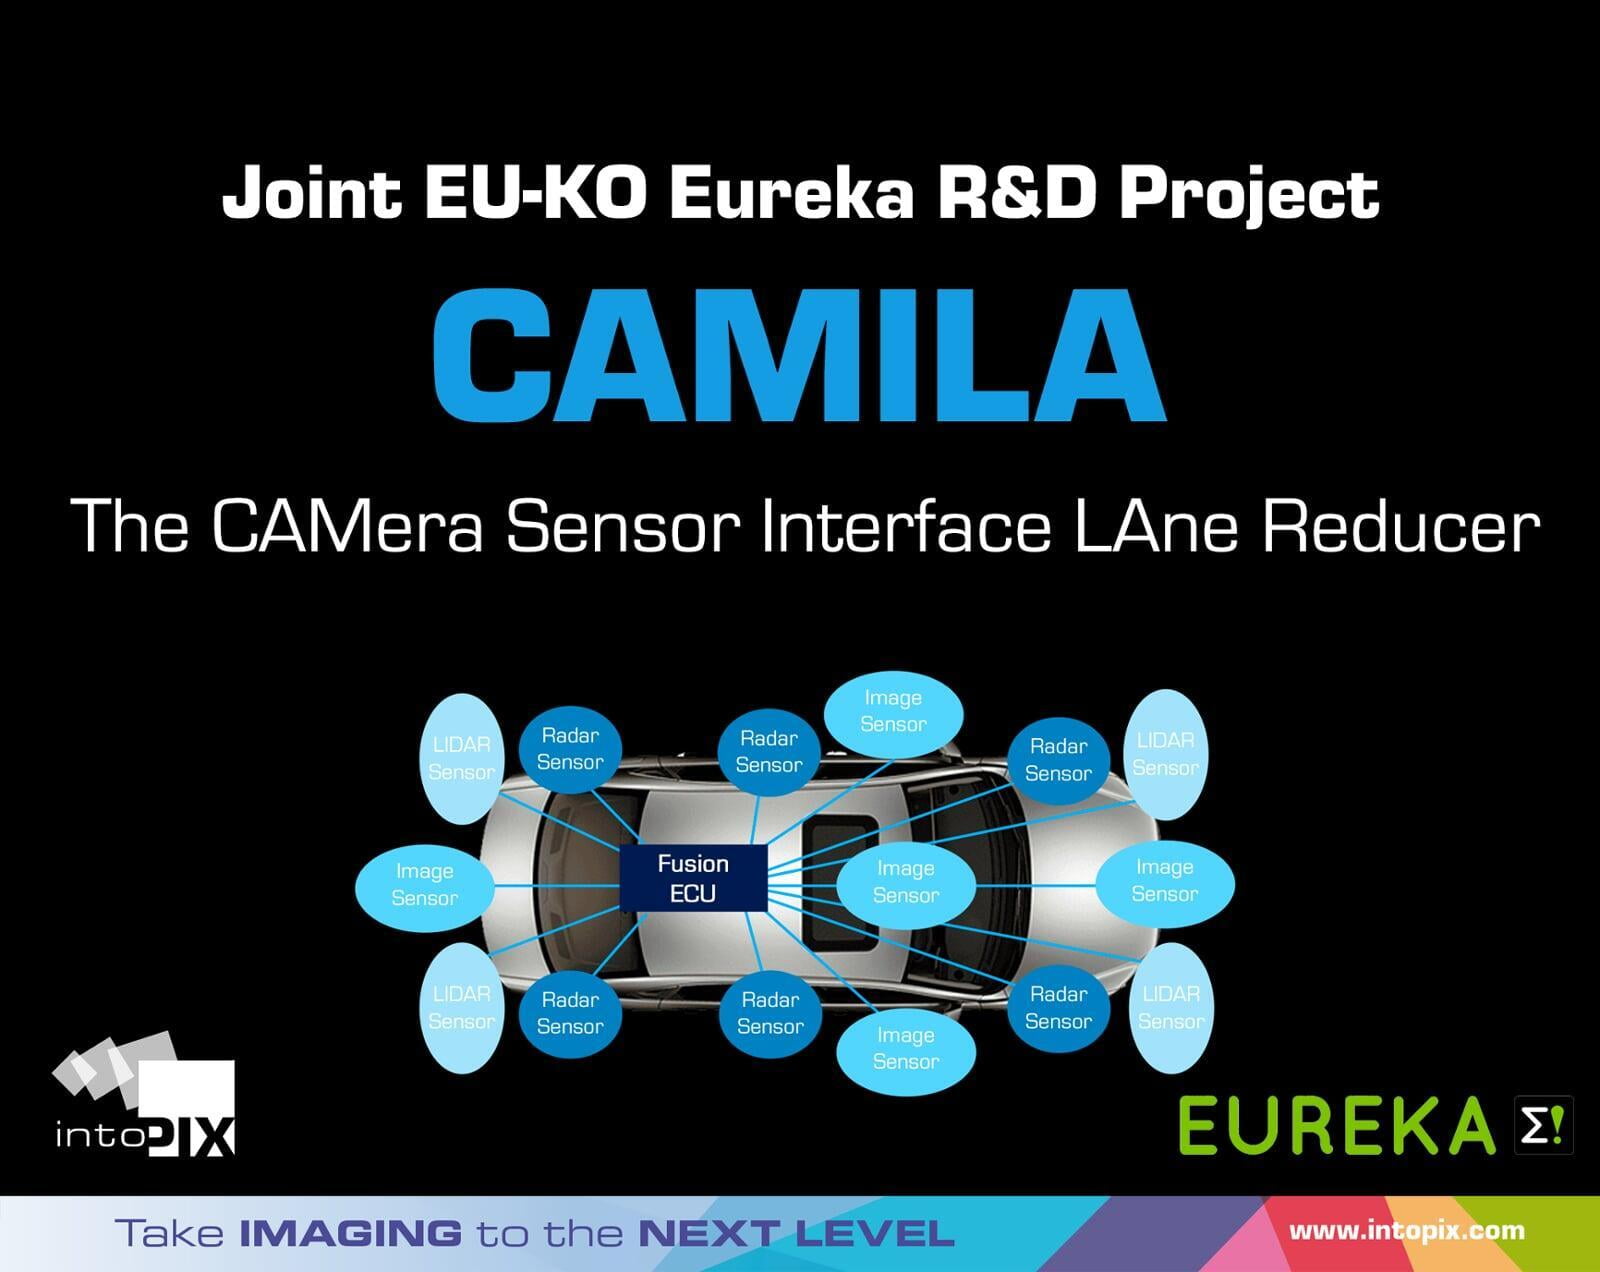 intoPIX is leading the new research project CAMILA, the CAMera Sensor Interface LAne Reducer